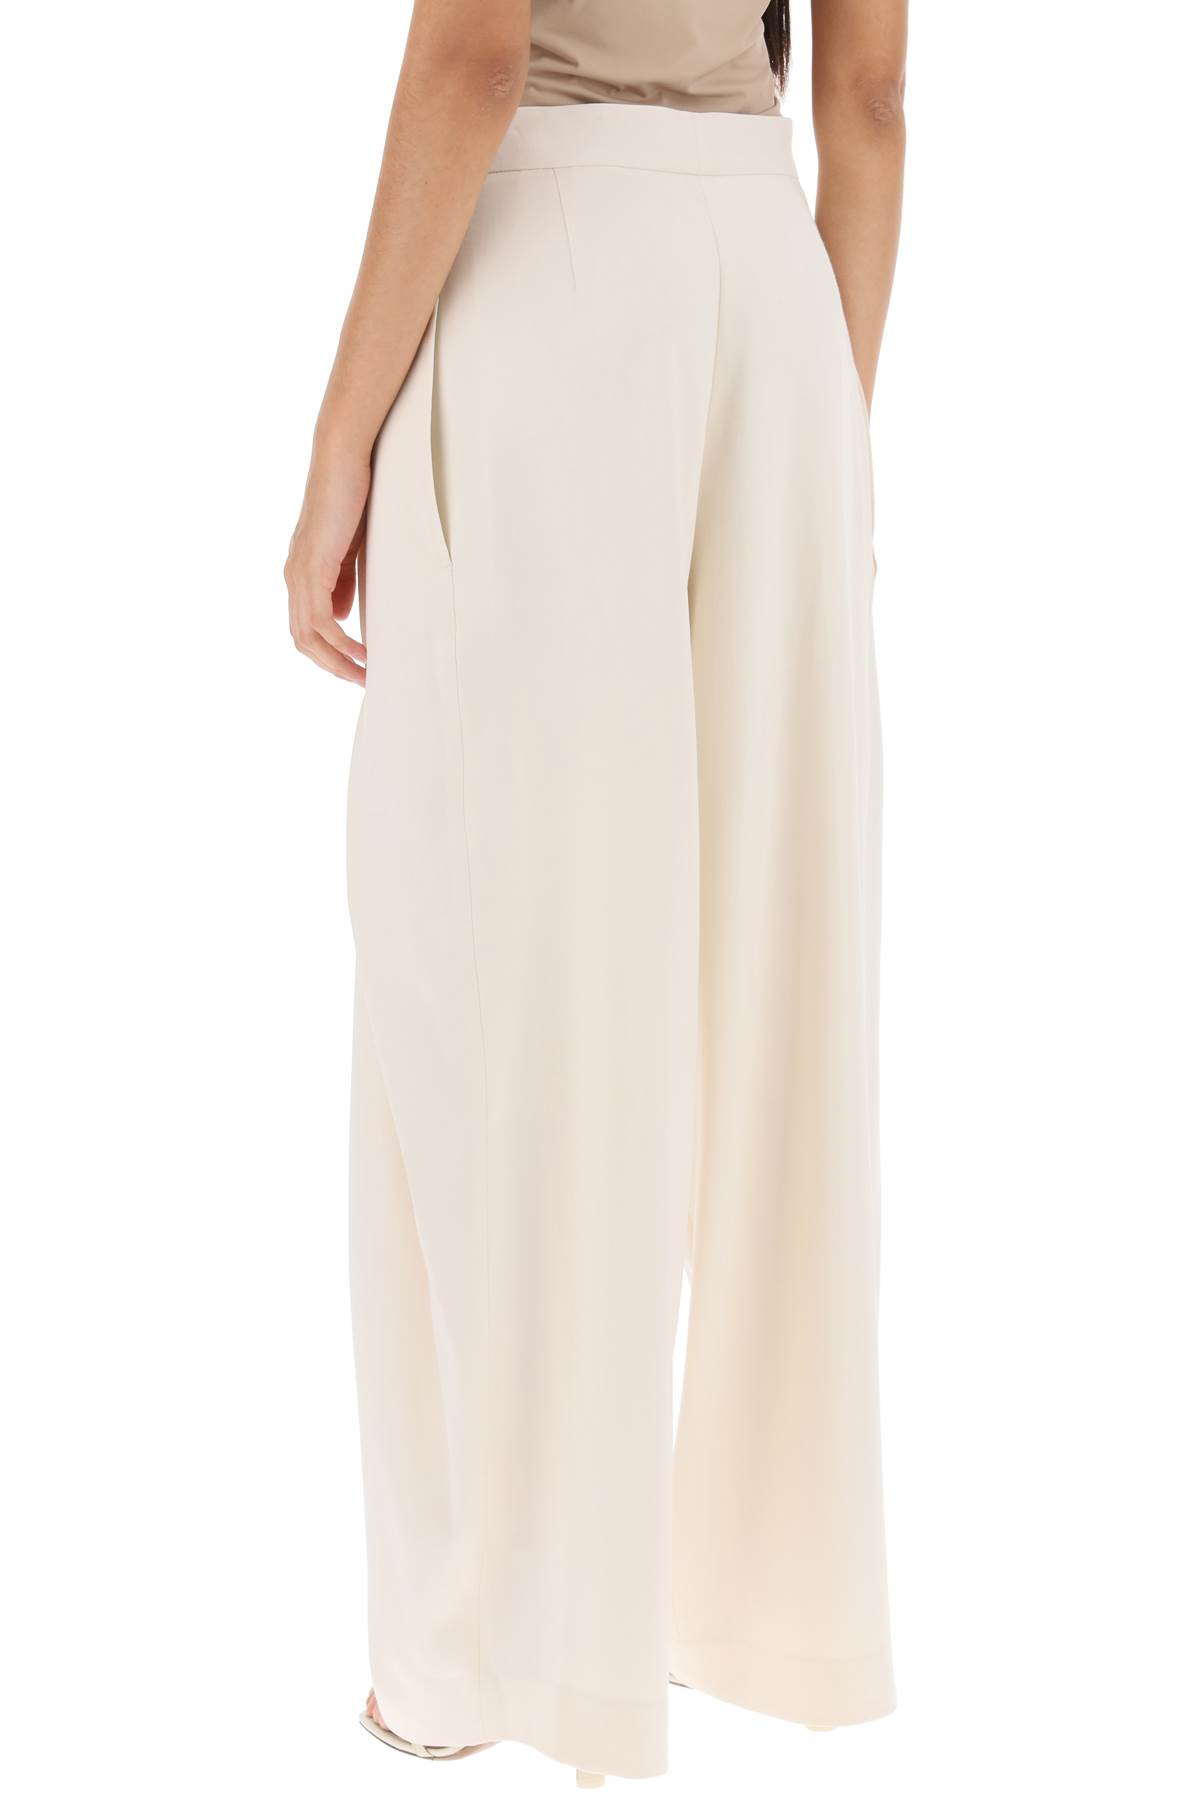 Shop Ami Alexandre Mattiussi Wide Fit Pants With Floating Panels In Ivory (white)